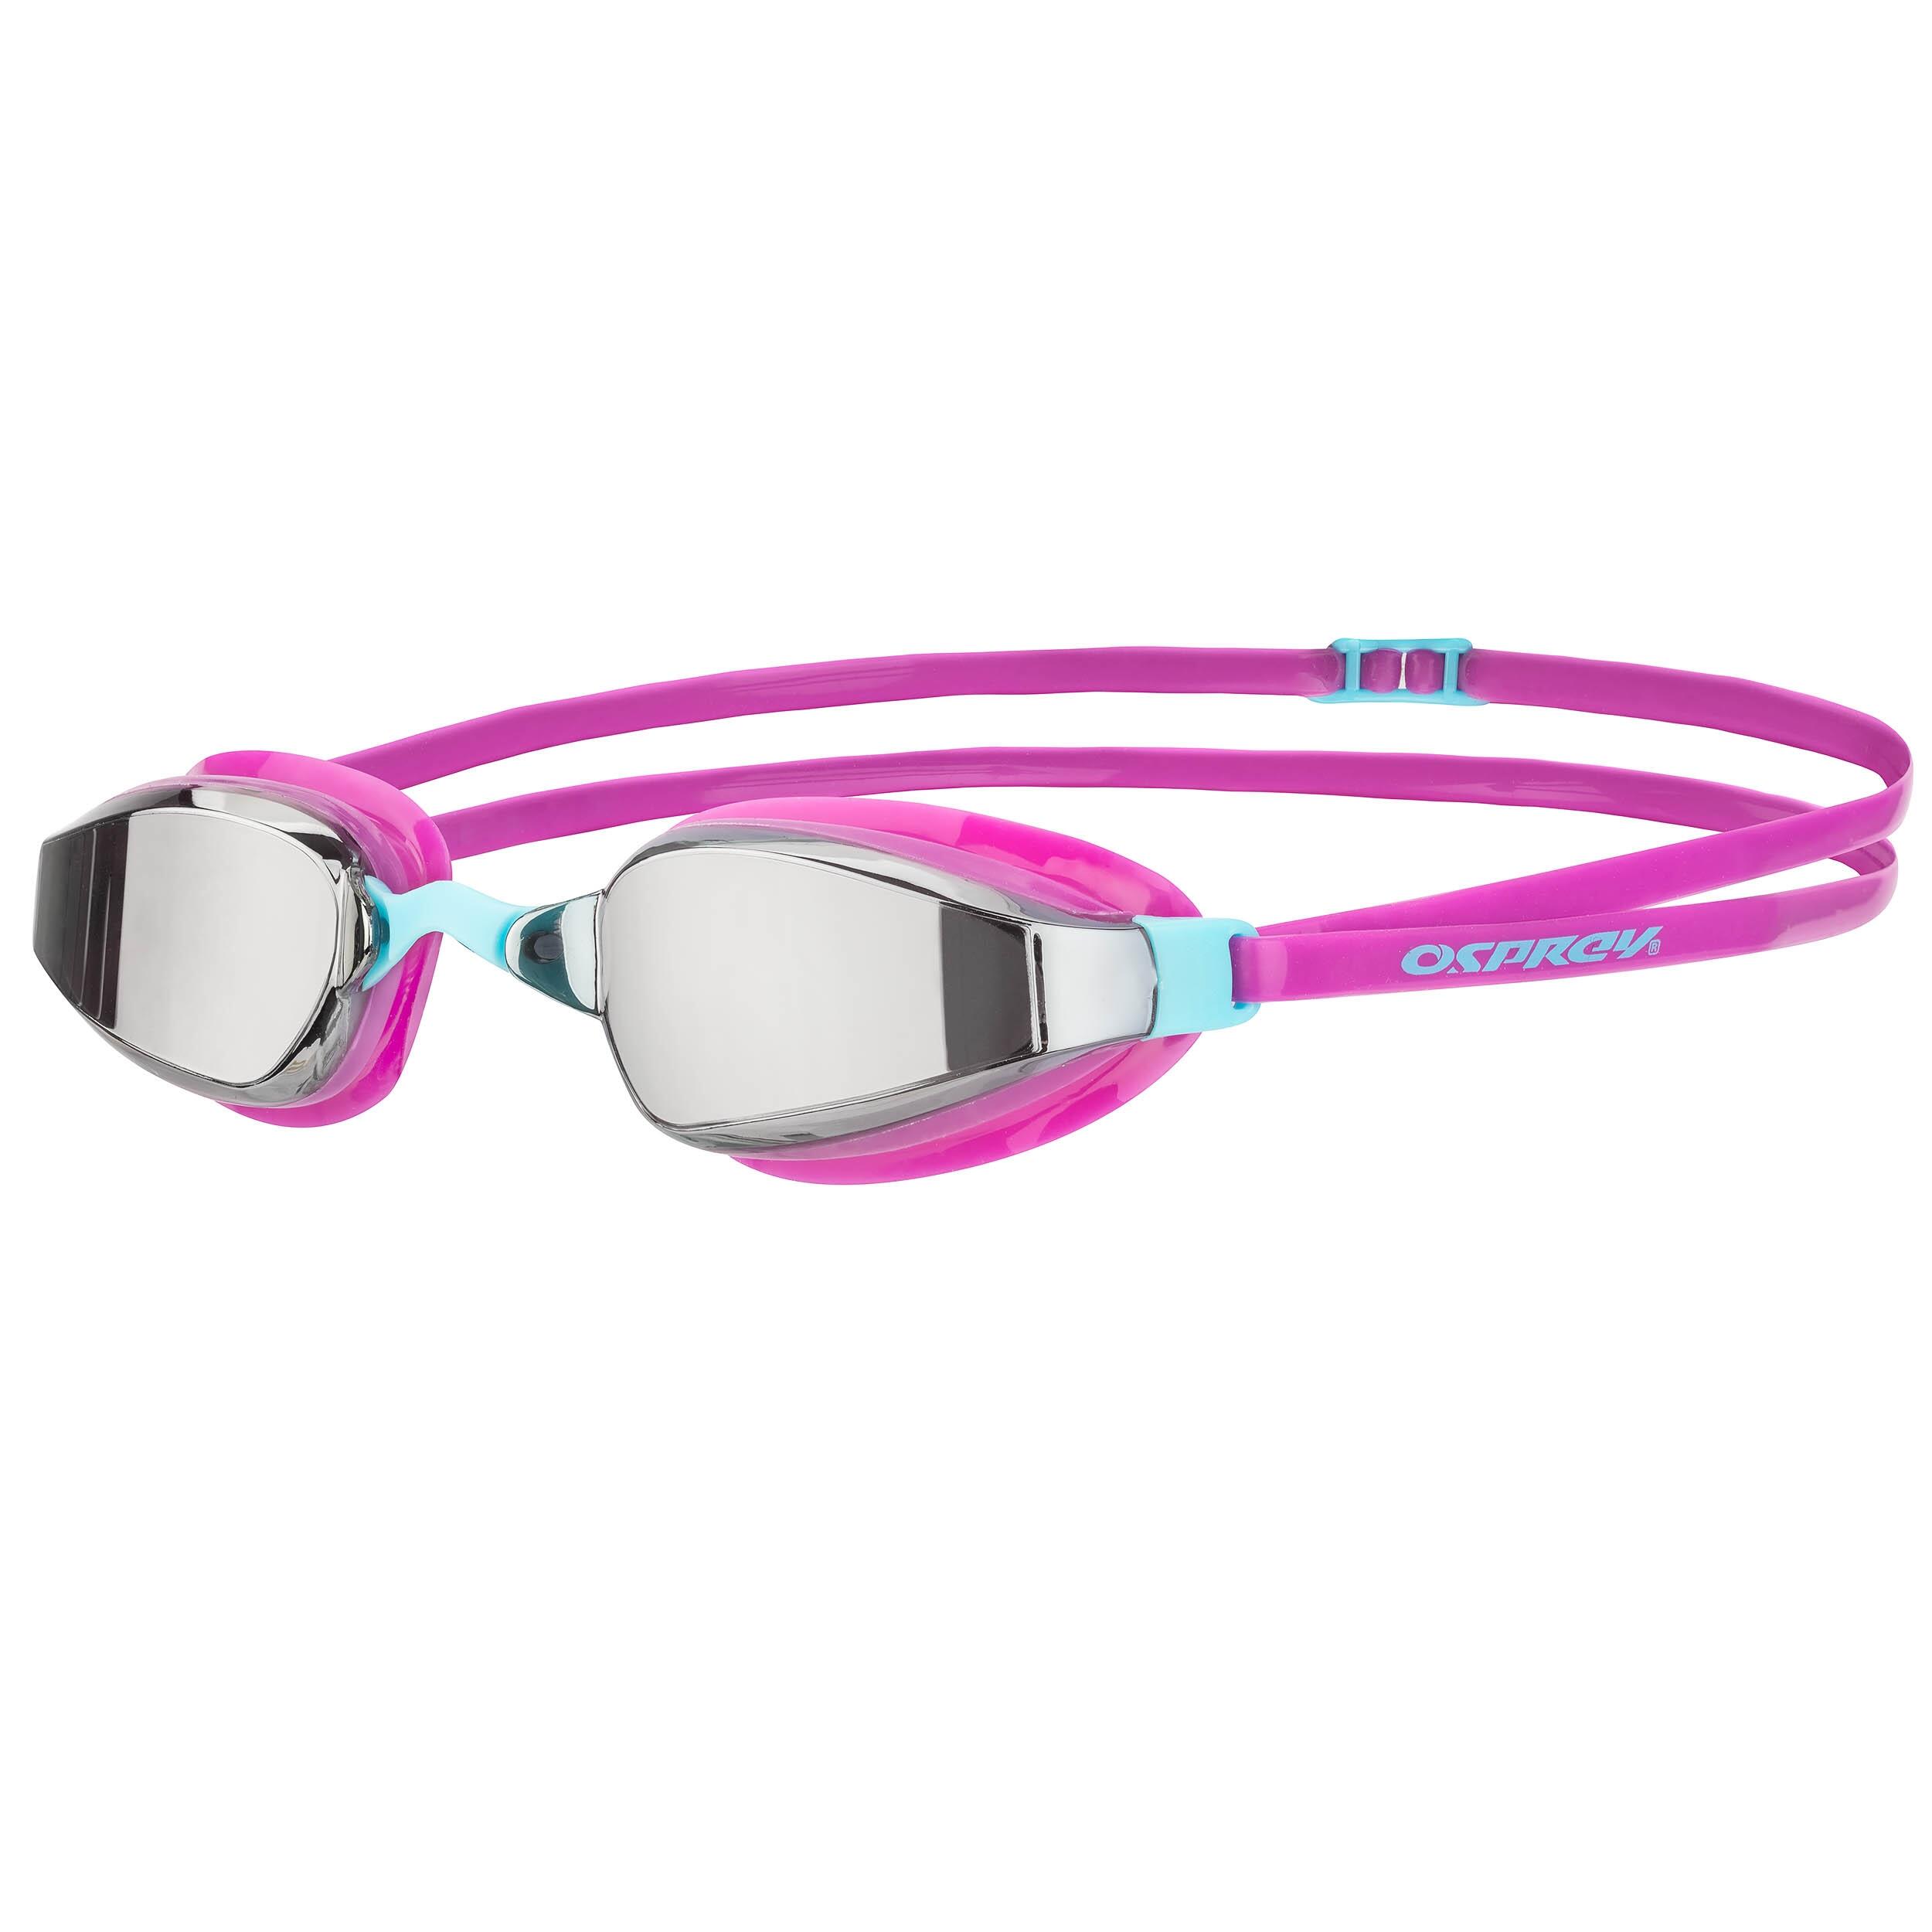 Osprey Adult Goggles with UV Protection and Anti Fog Wide View Lens Purple 1/5